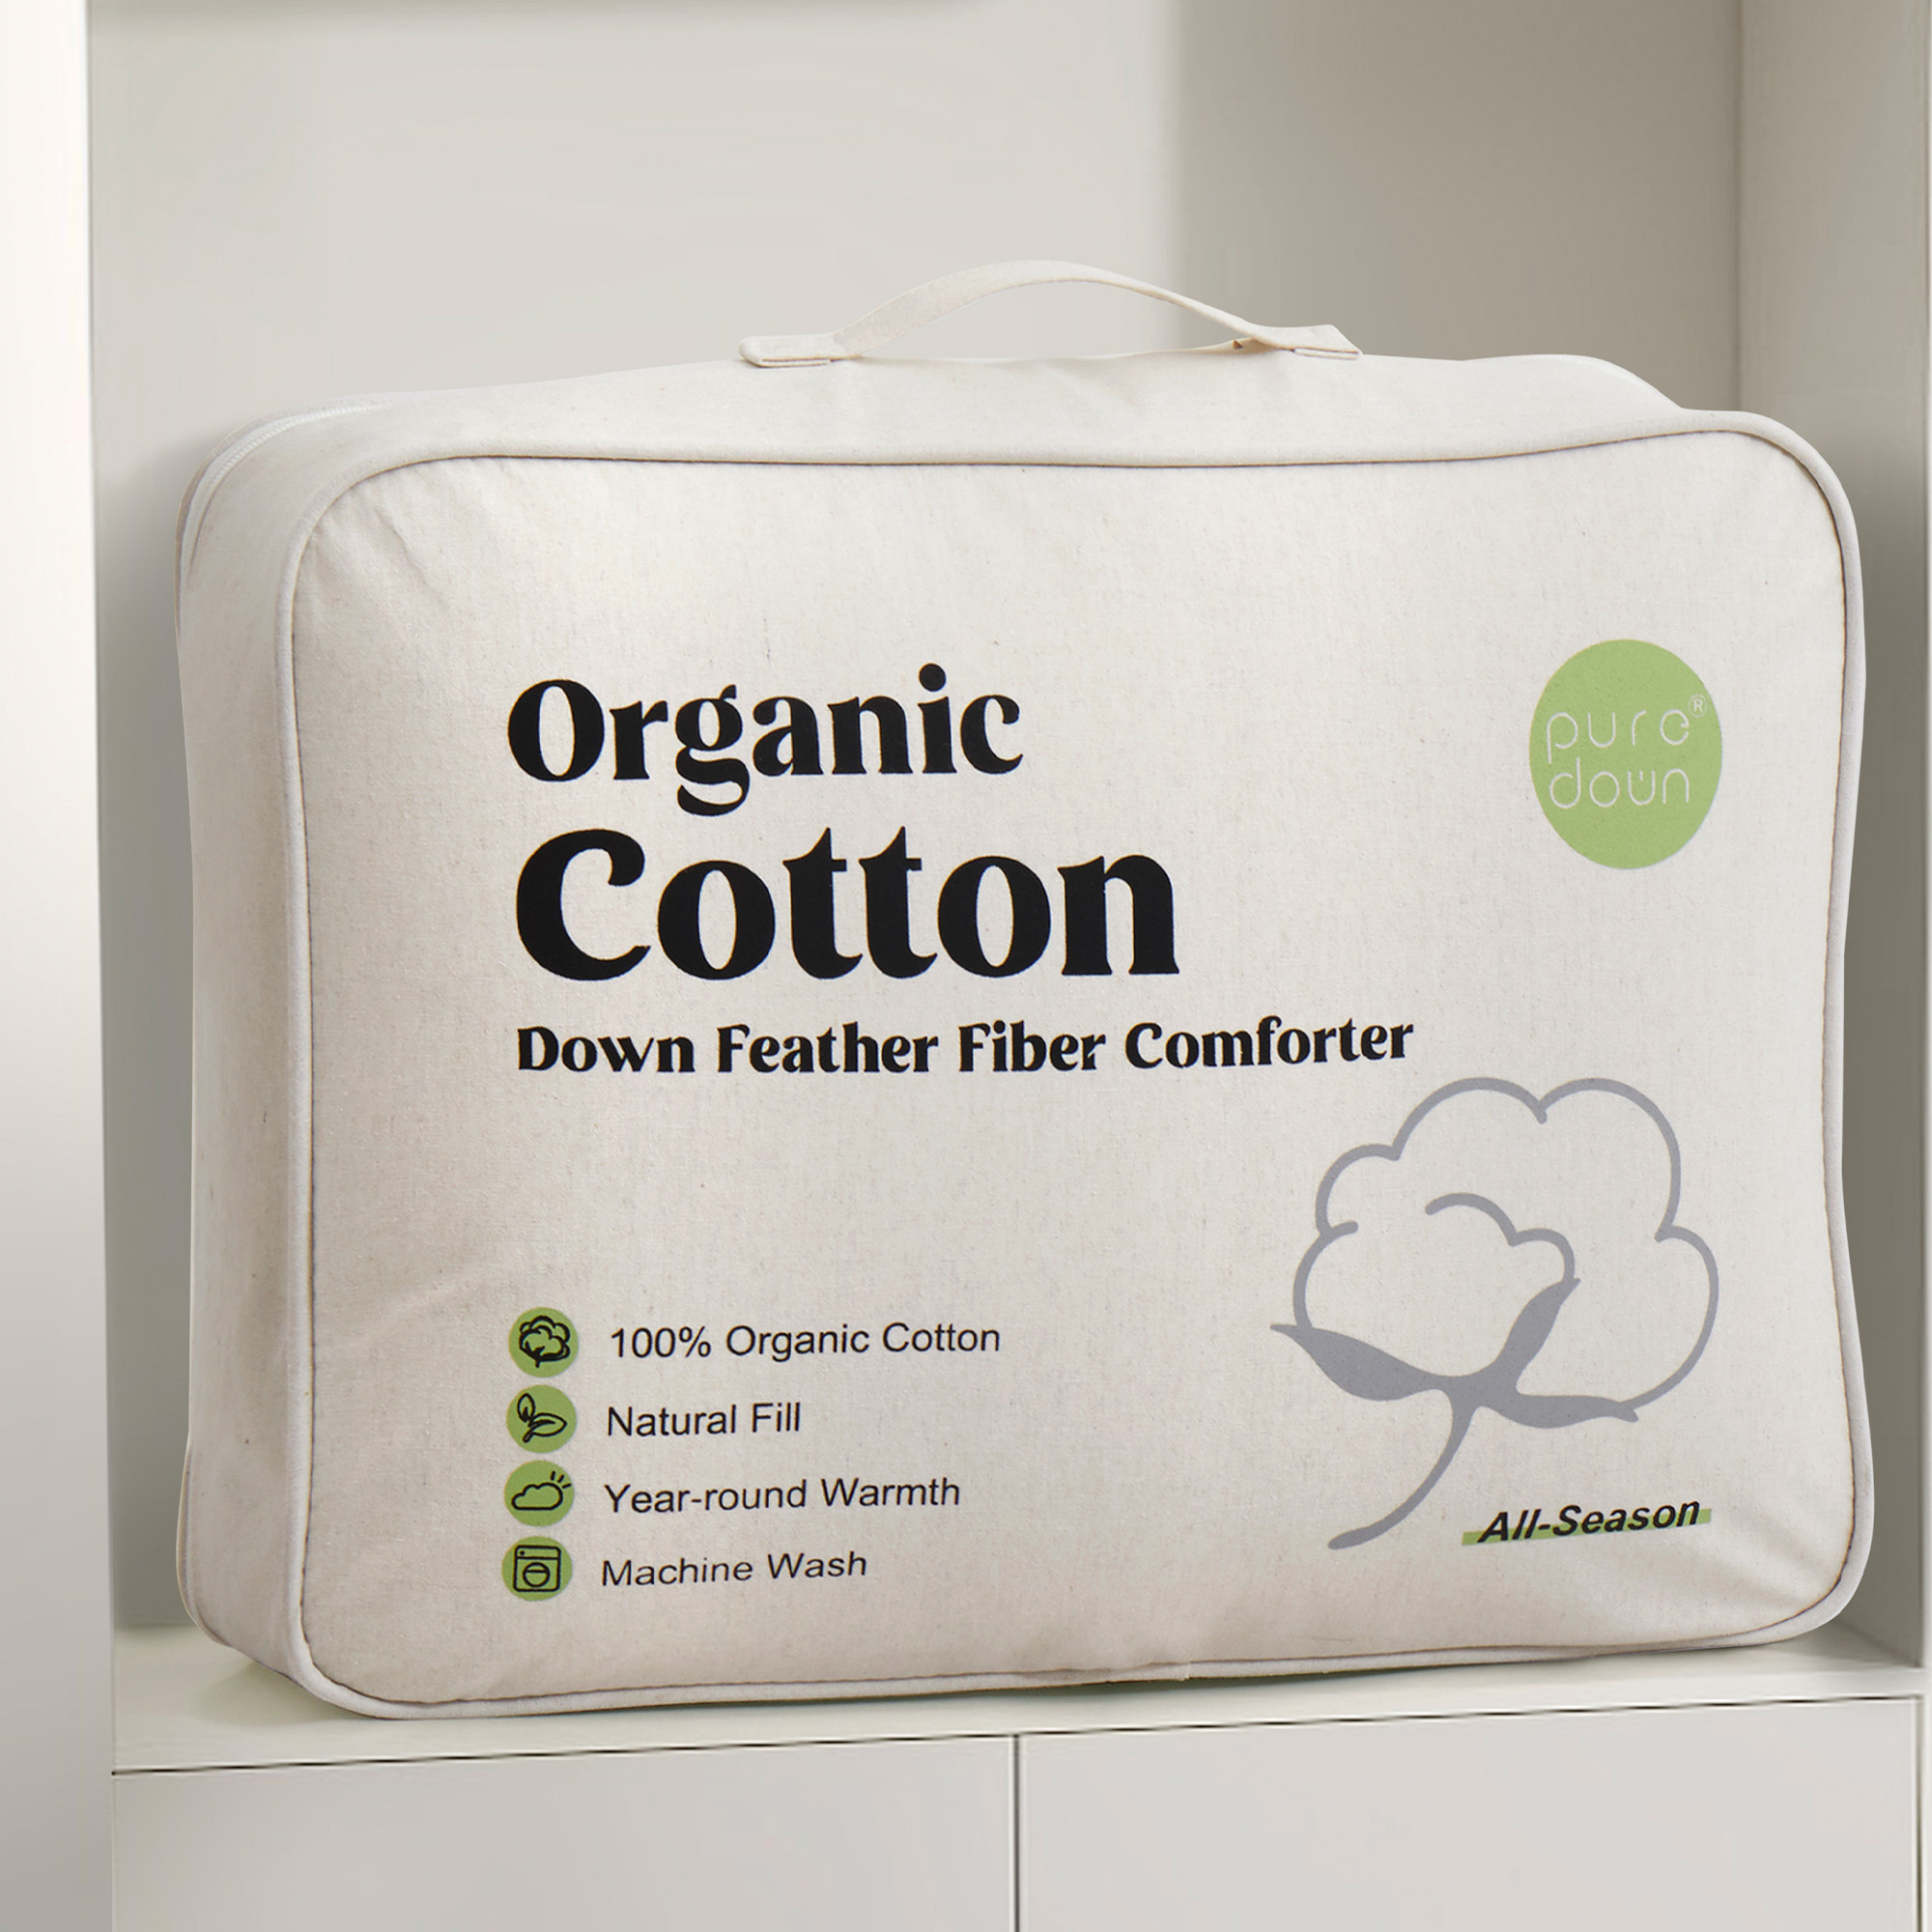 All Season Goose Down And Feather Fiber Comforter With Organic Cotton Fabric - King